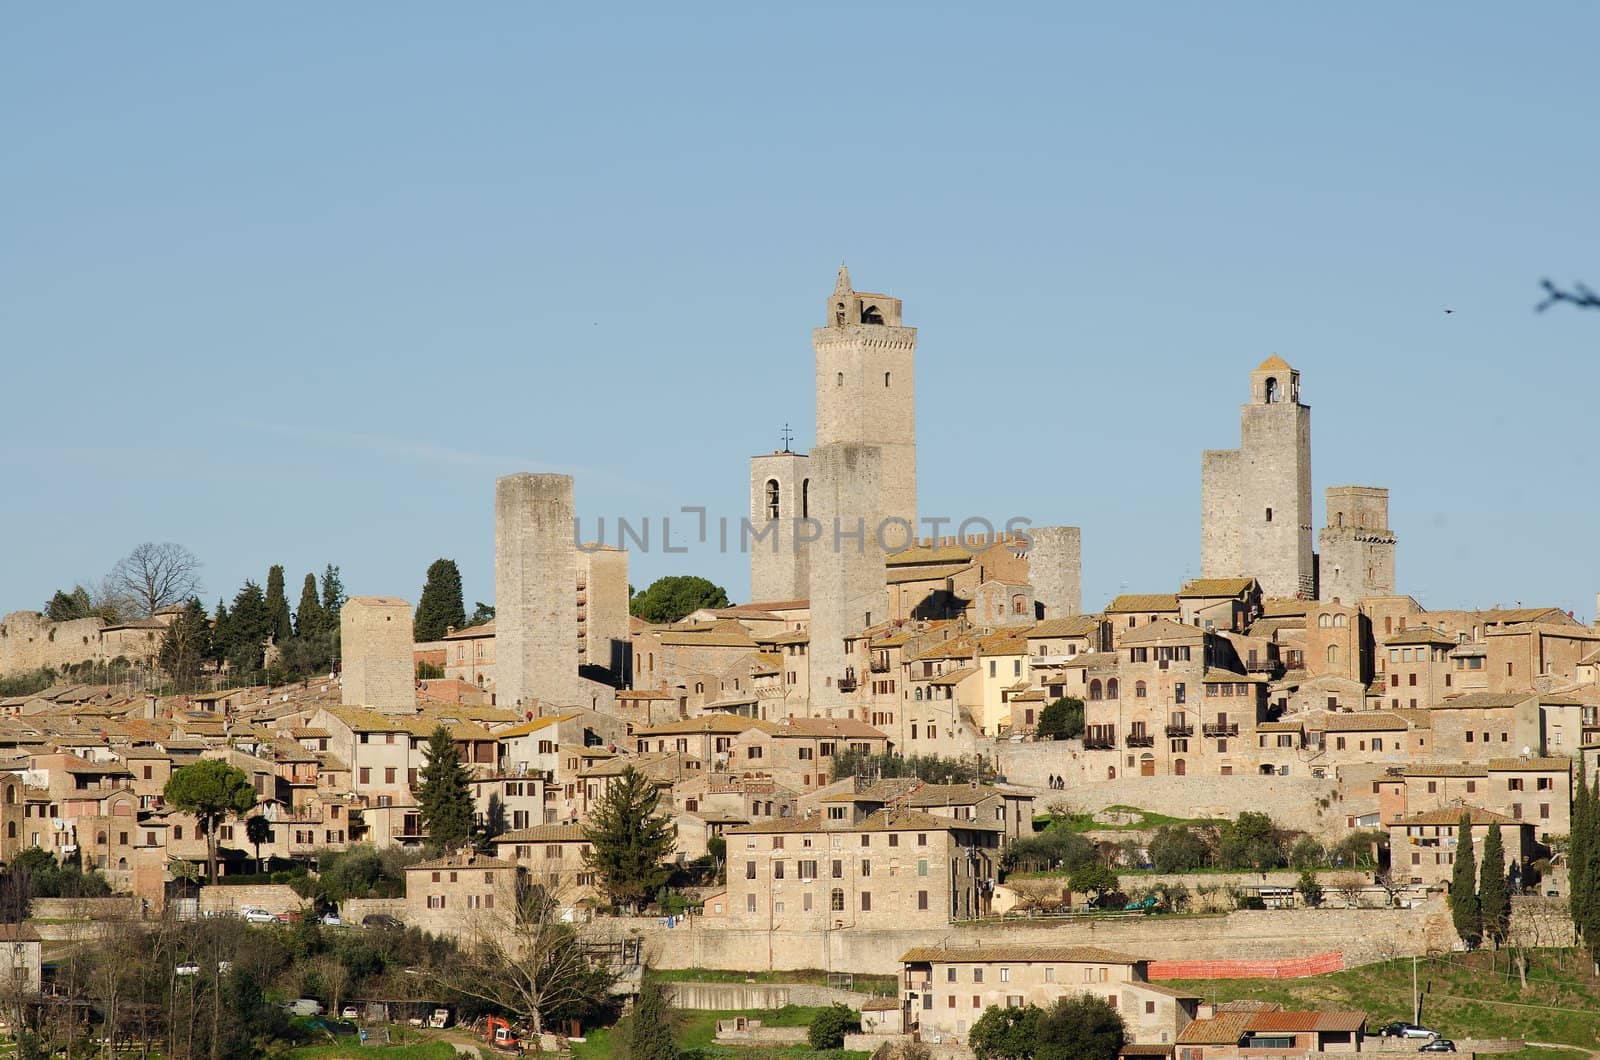 The medieval town of San Gimignano in tuscany